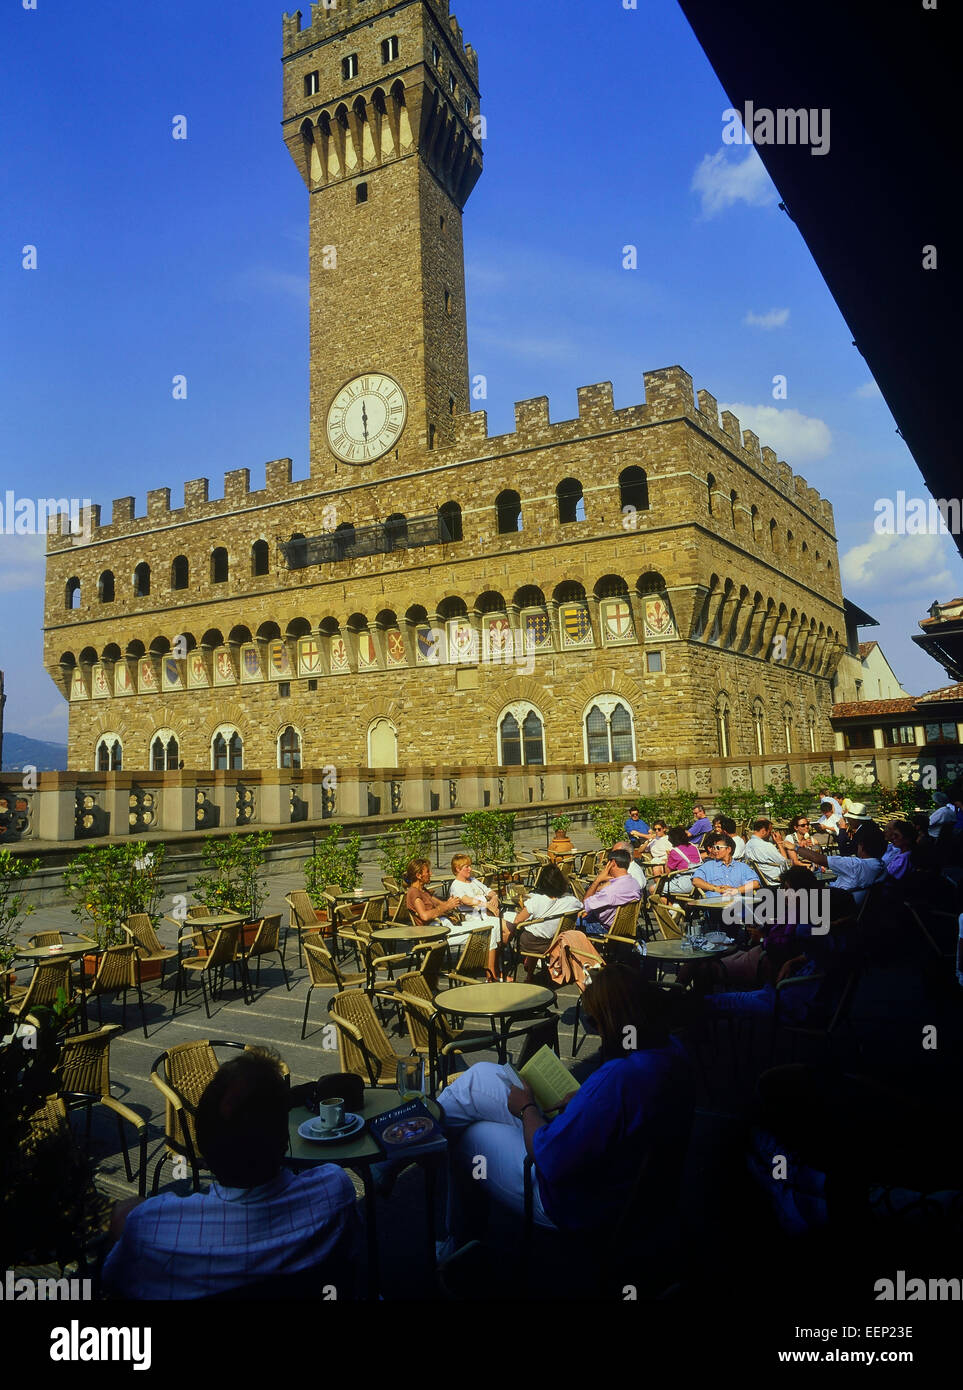 The Palazzo Vecchio seen from the Uffizi Gallery Cafeteria terrace, Florence. Italy, Europe Stock Photo